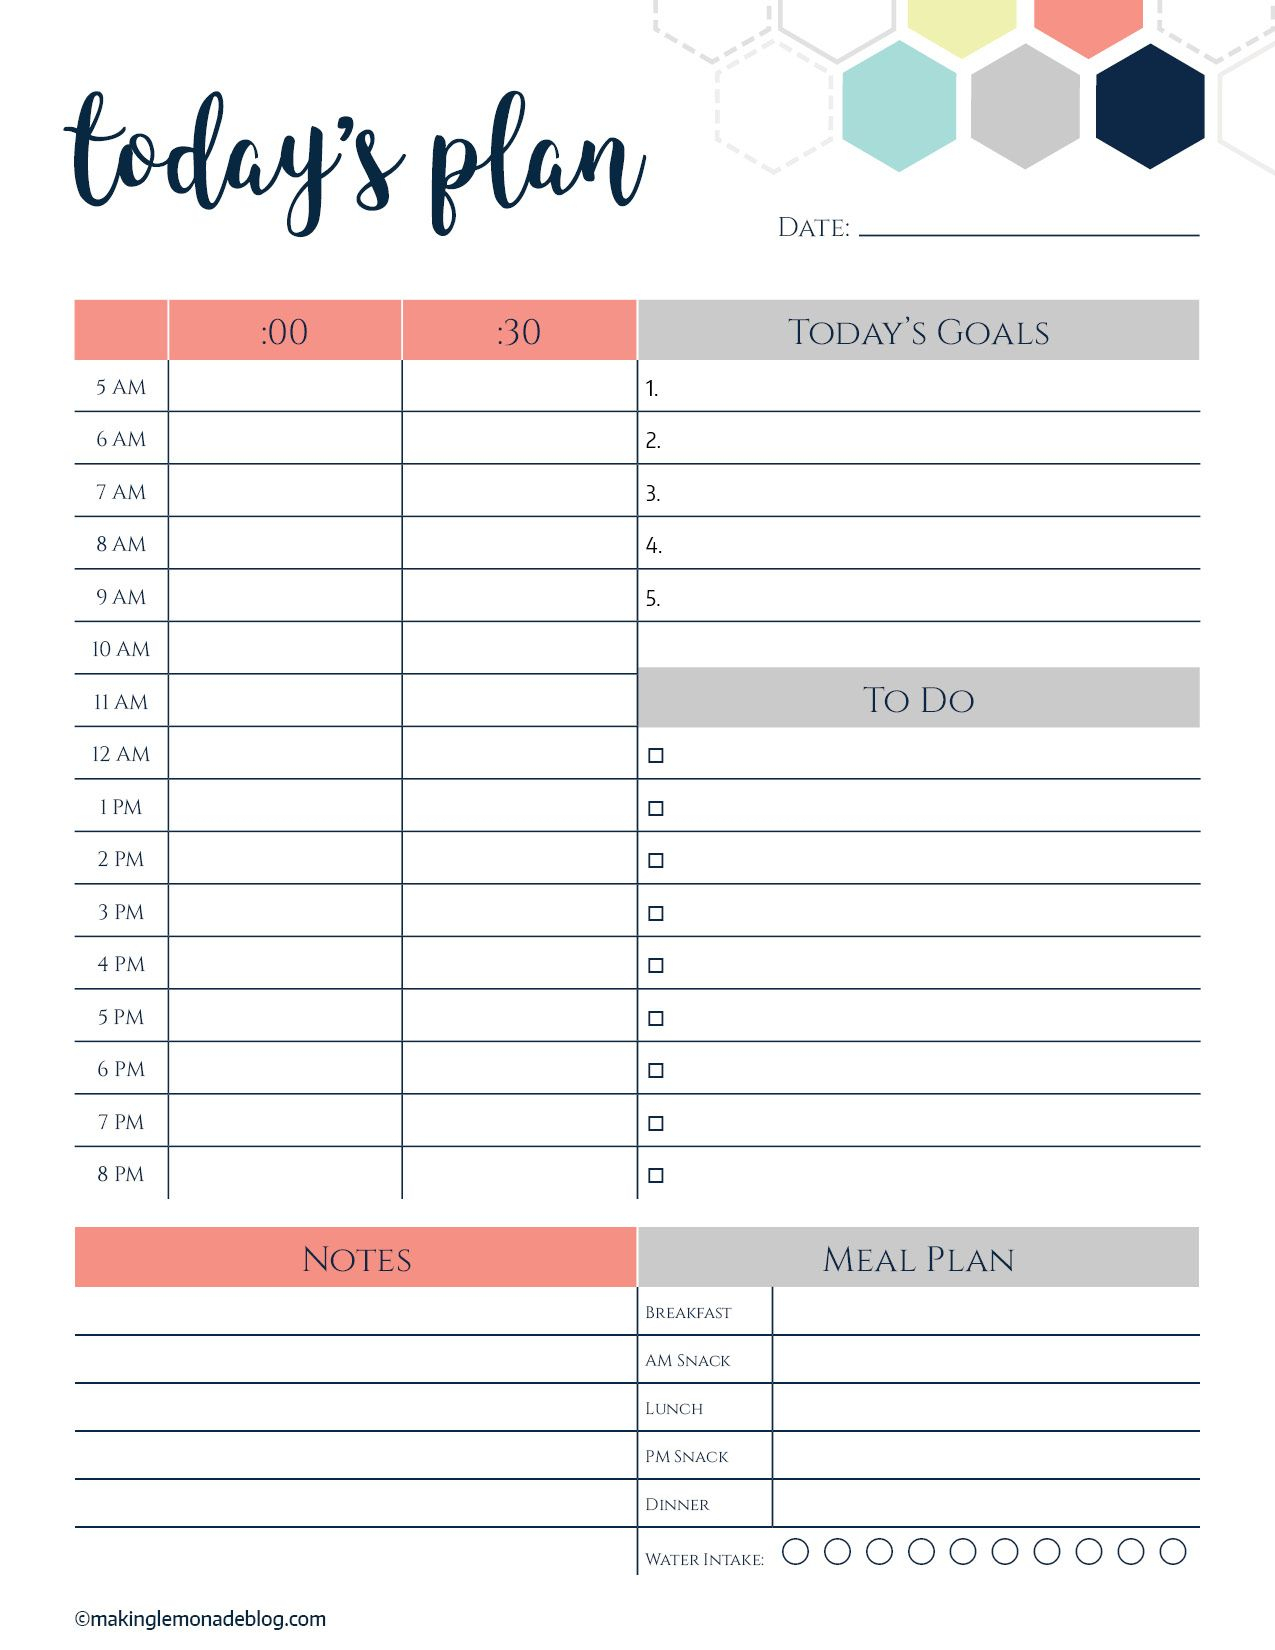 This Free Printable Daily Planner Changes Everything. Finally A Way - Free Cute Printable Planner 2017